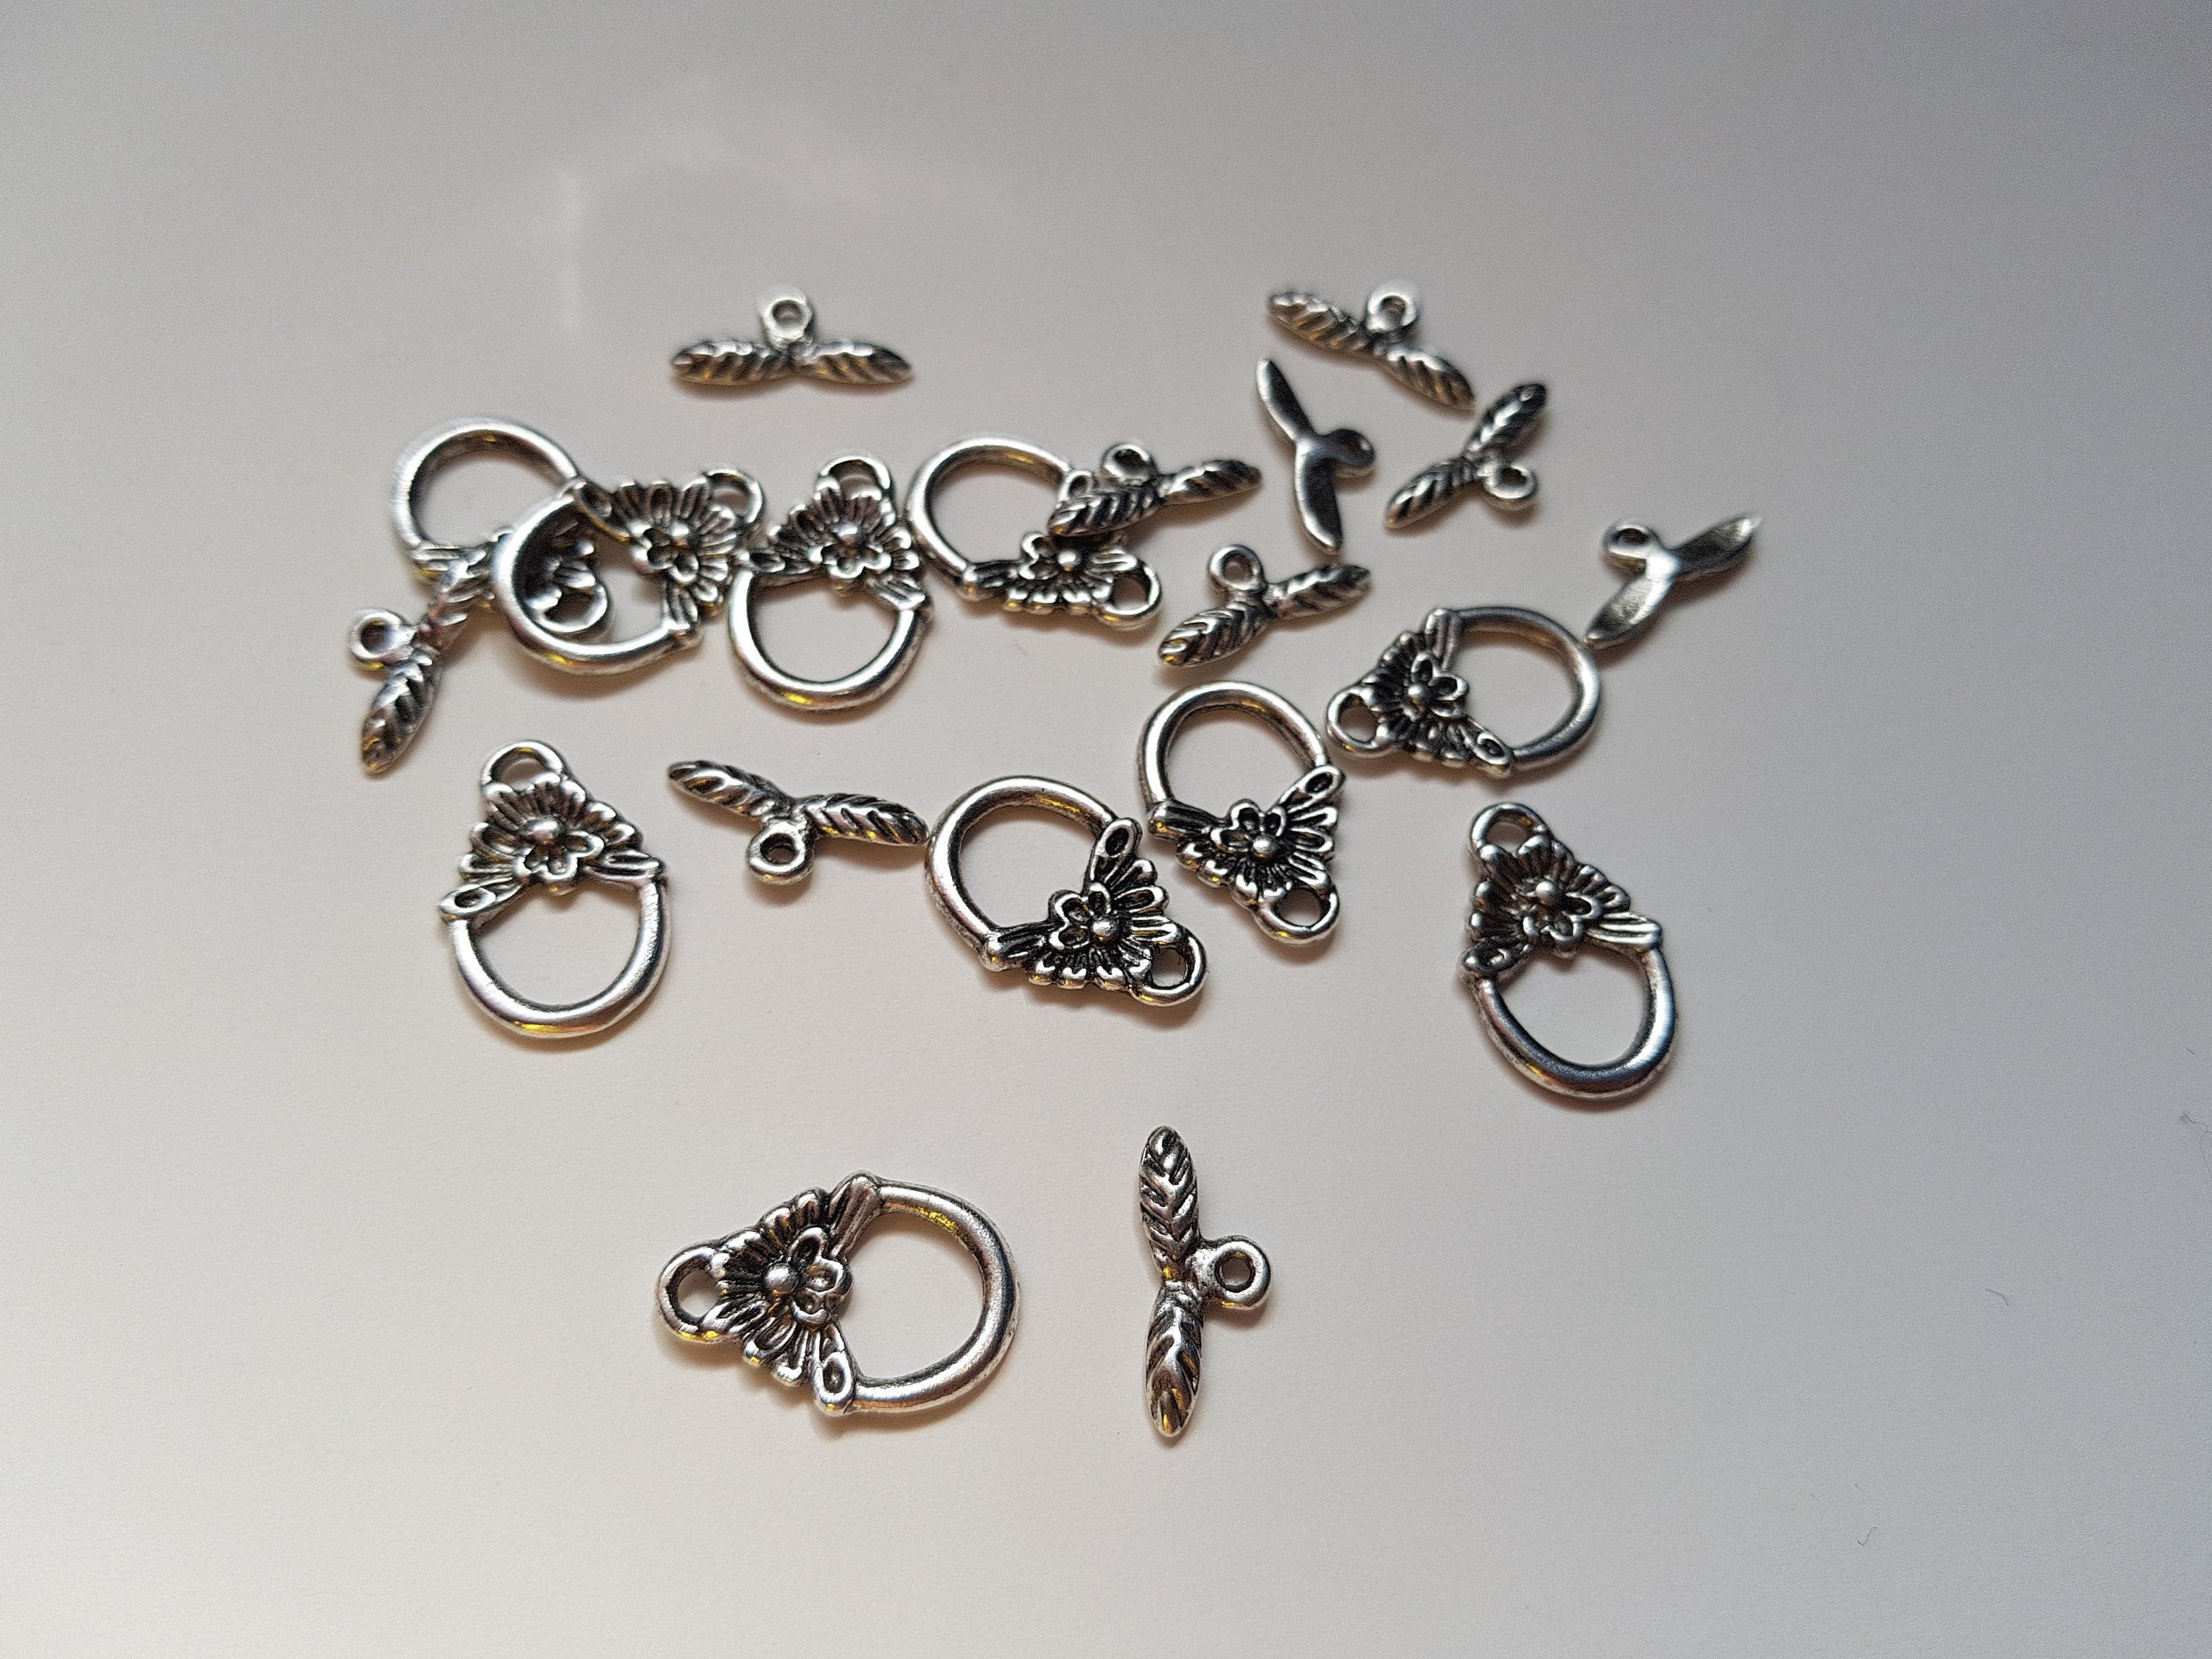 10 pcs Silver tone flower toggle clasps jewellery making findings